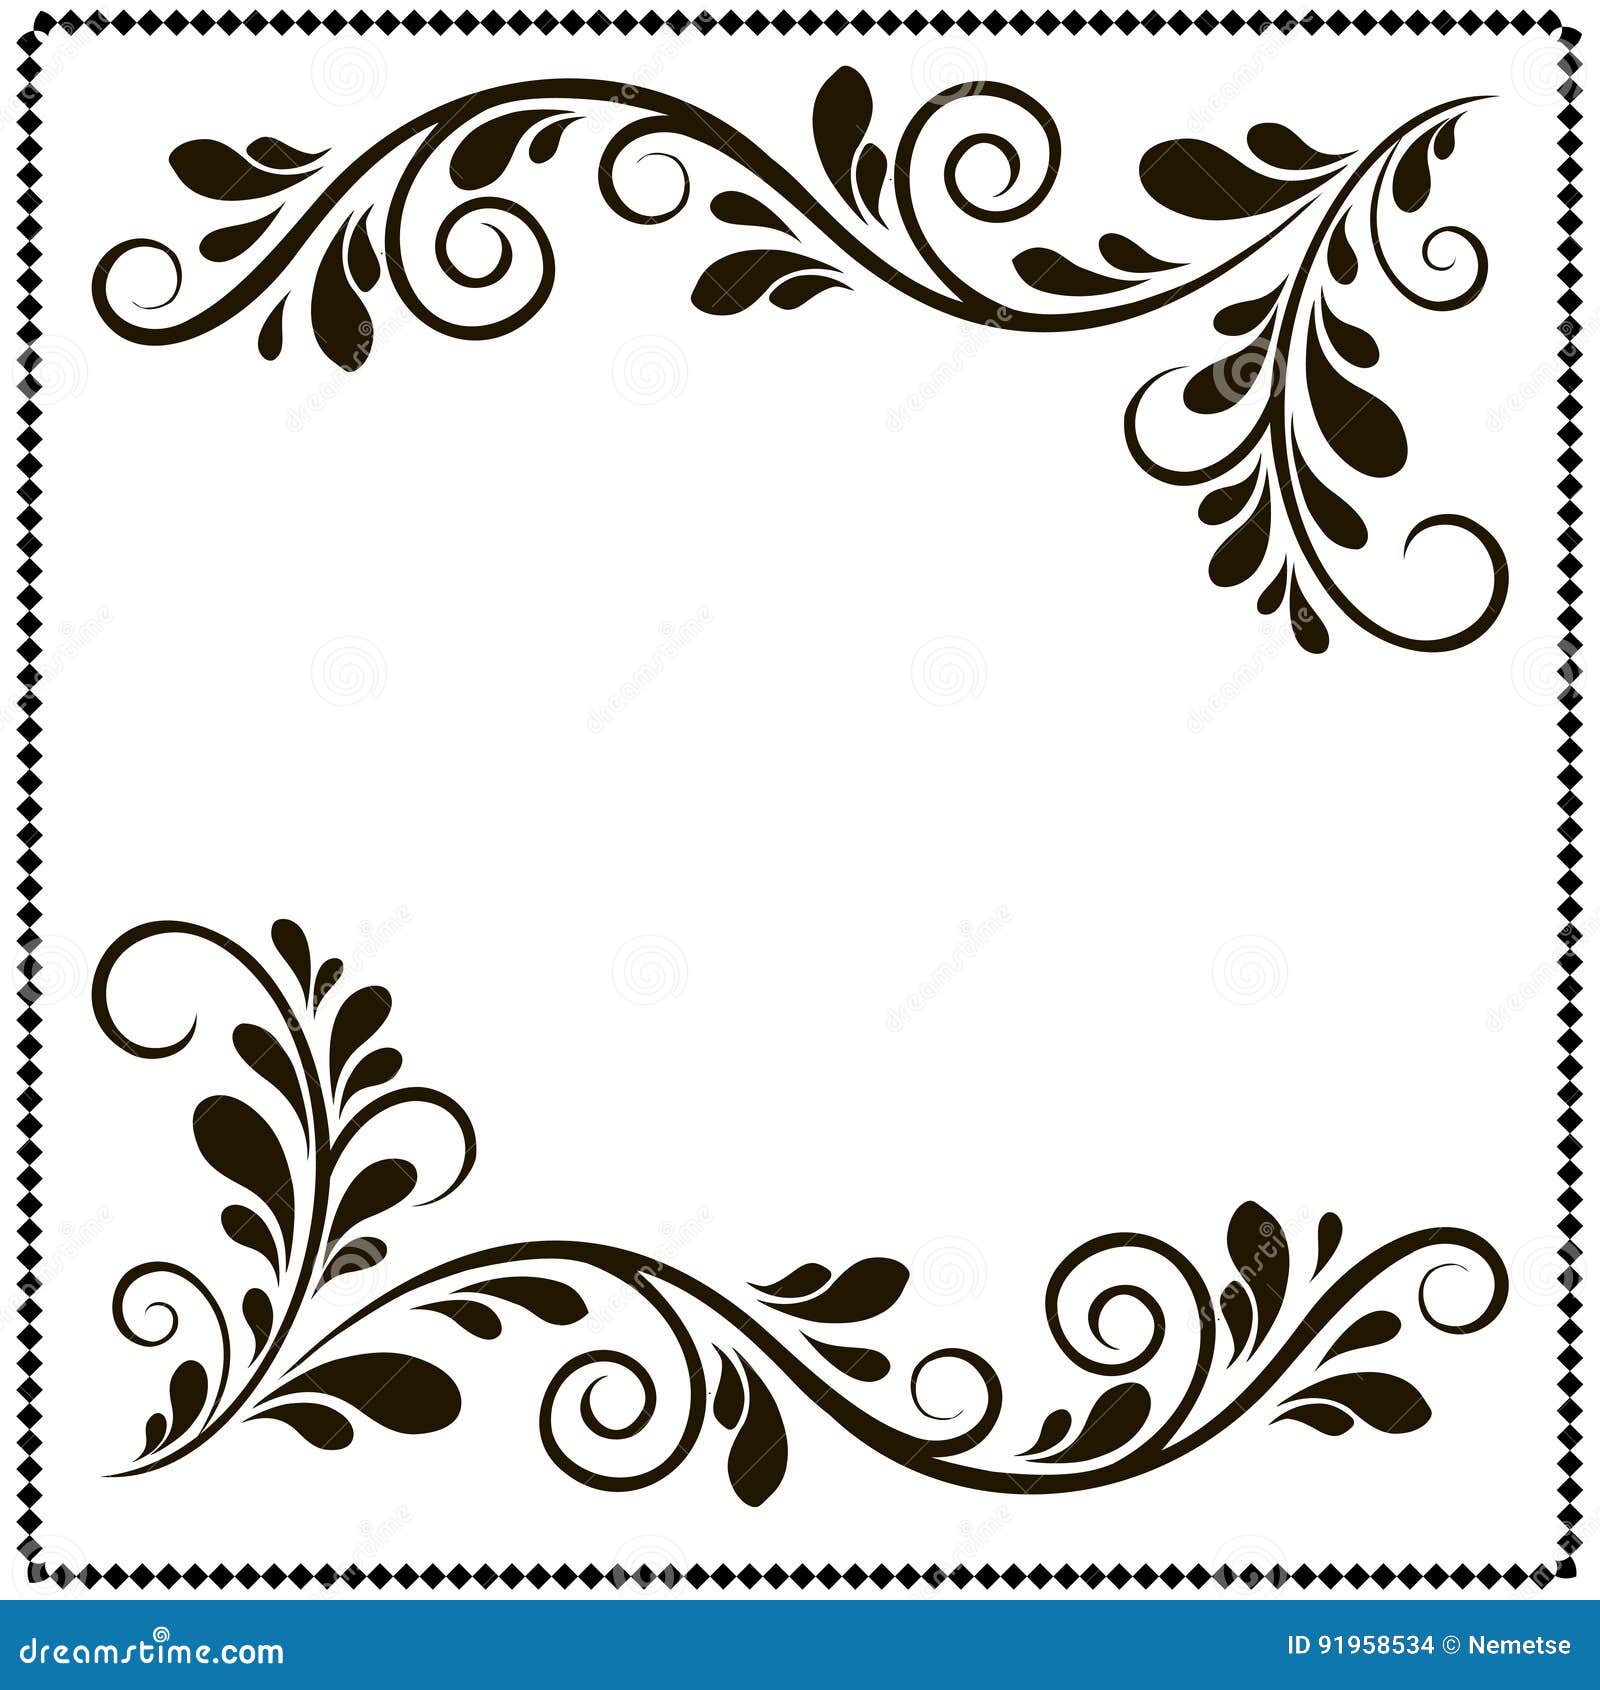 Black and White Border Frame with Floral Patterns Stock Vector